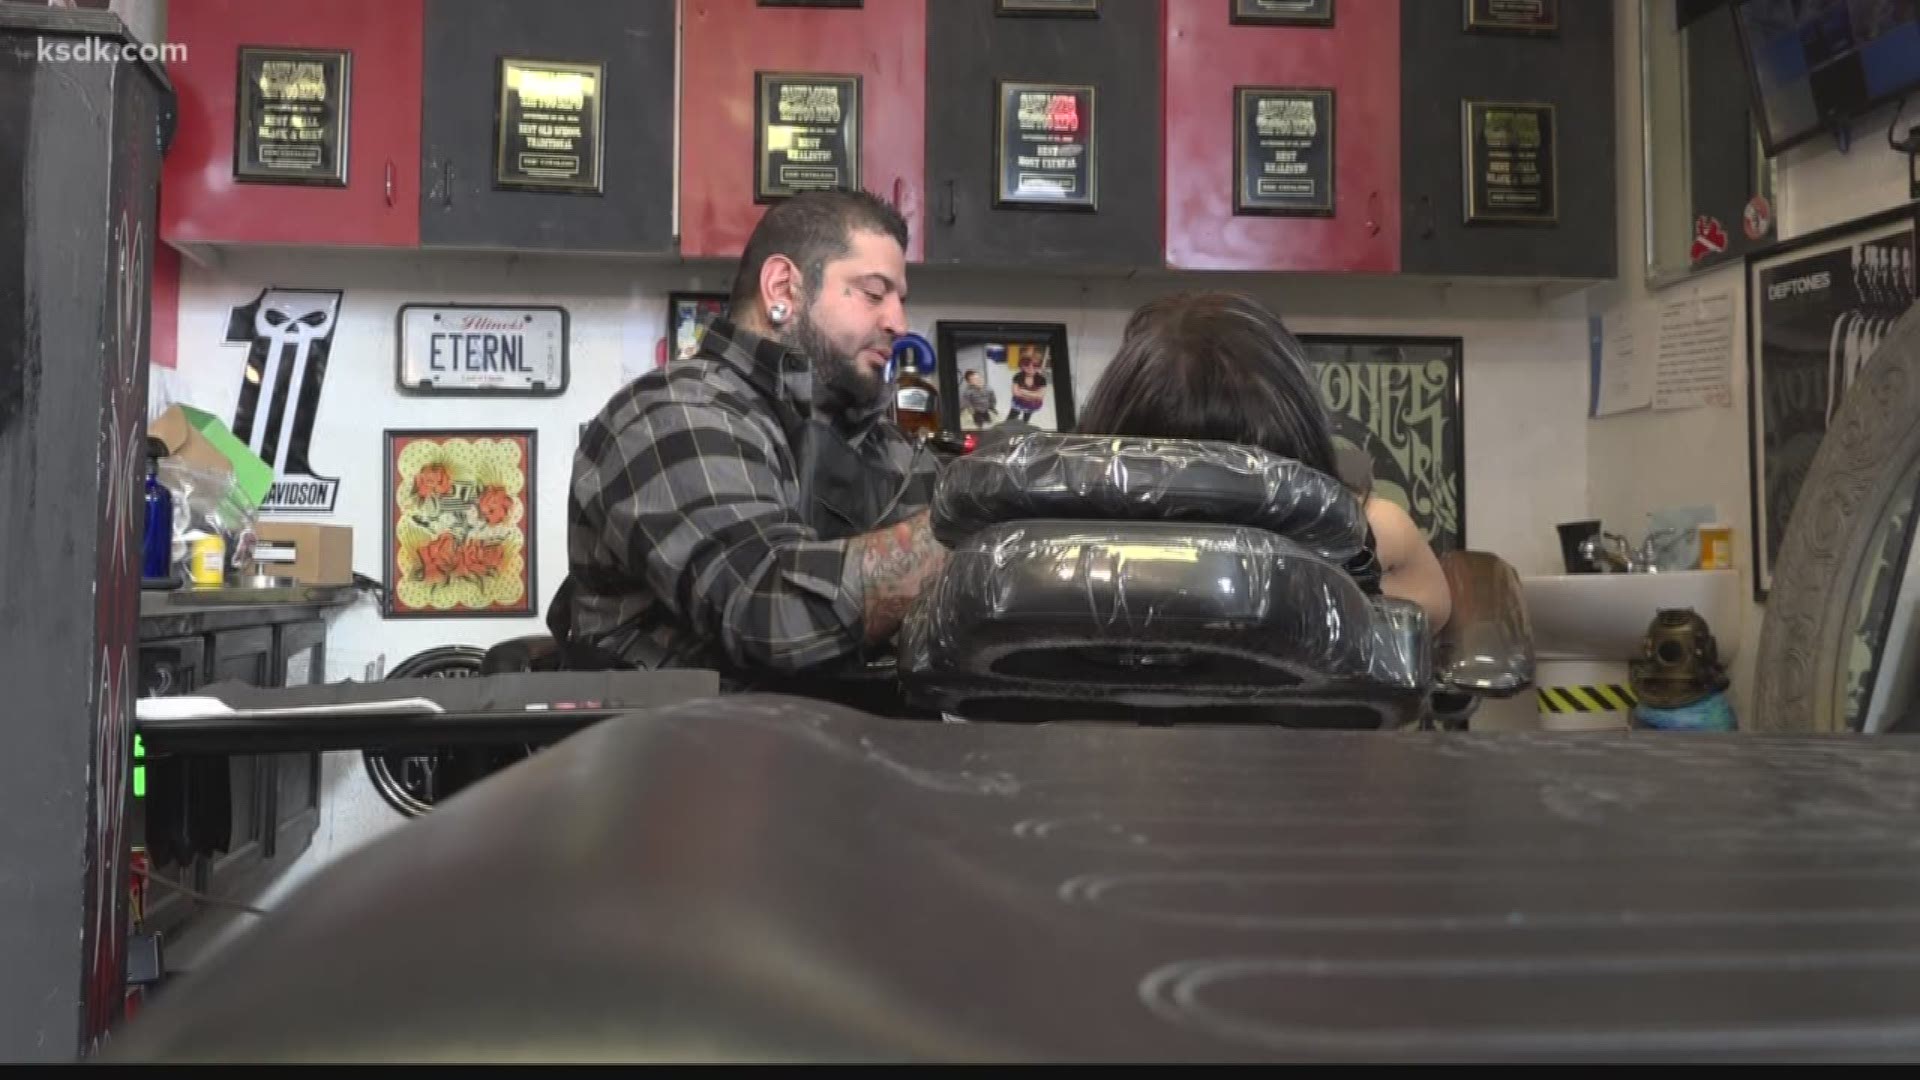 St Louis Tattoo Artist Goes Viral Helping Amputees And Women With Breast Cancer